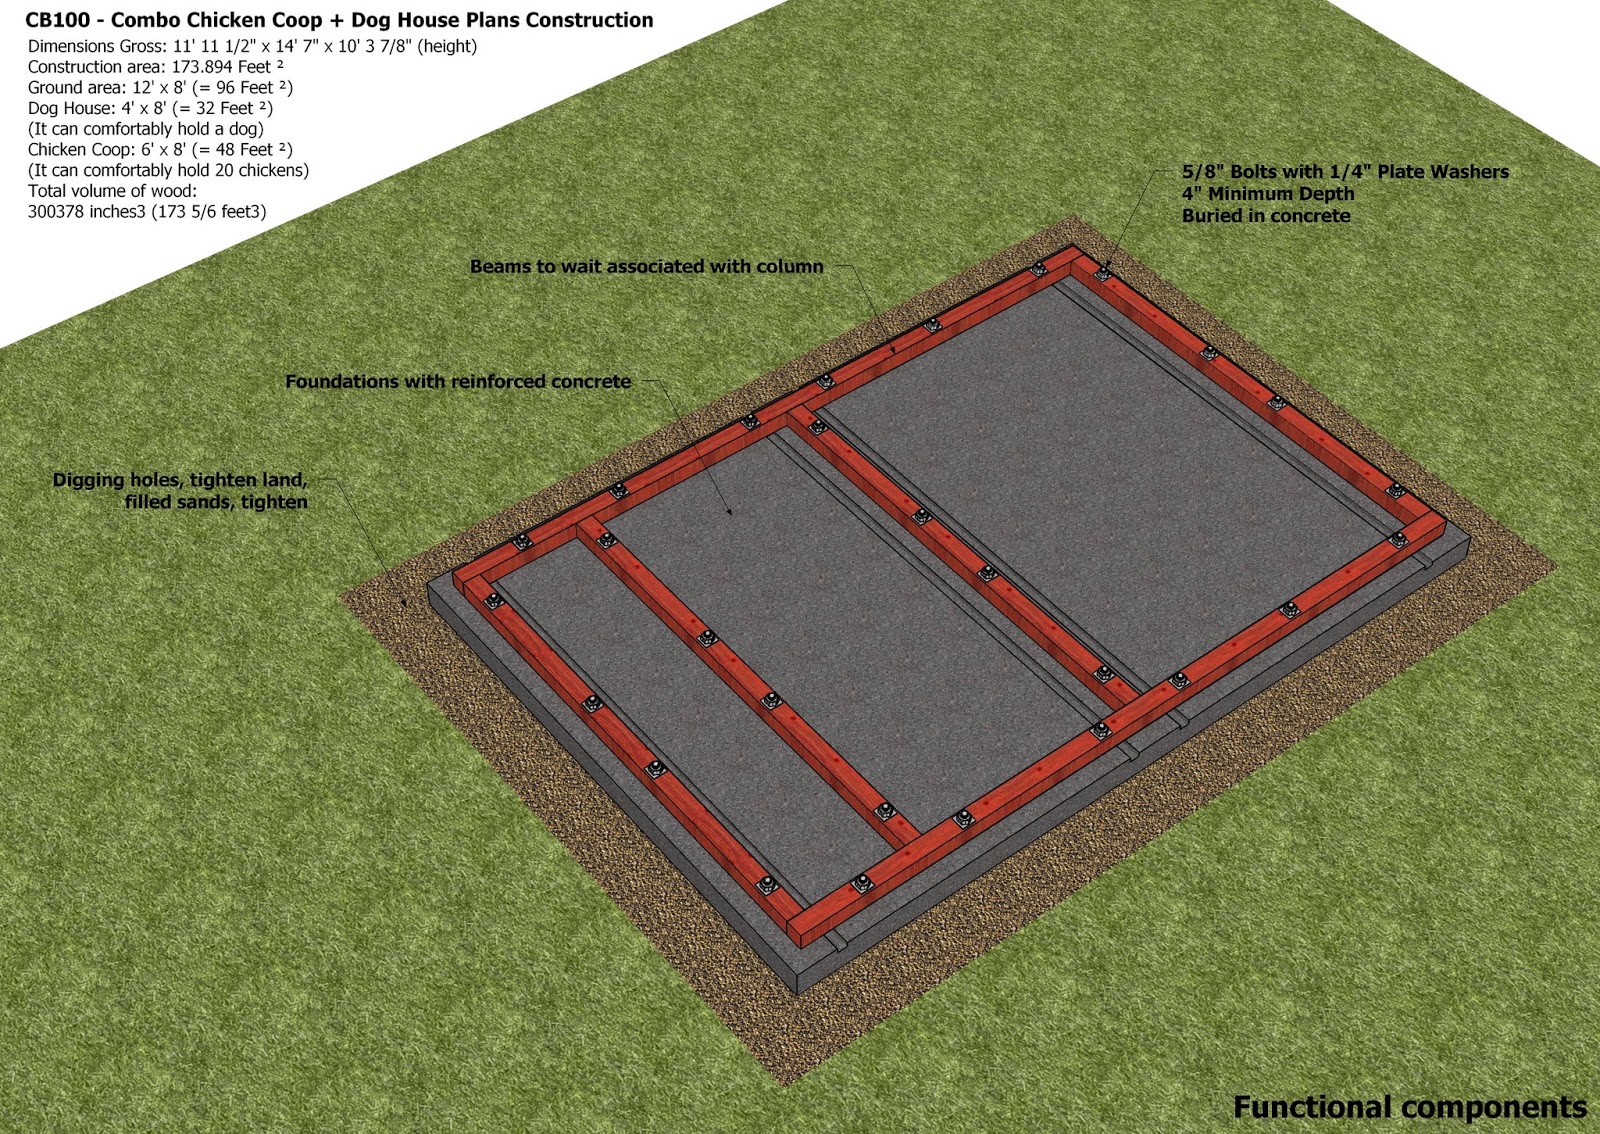 Plans – Chicken Coop Plans Construction + Insulated Dog House Plans